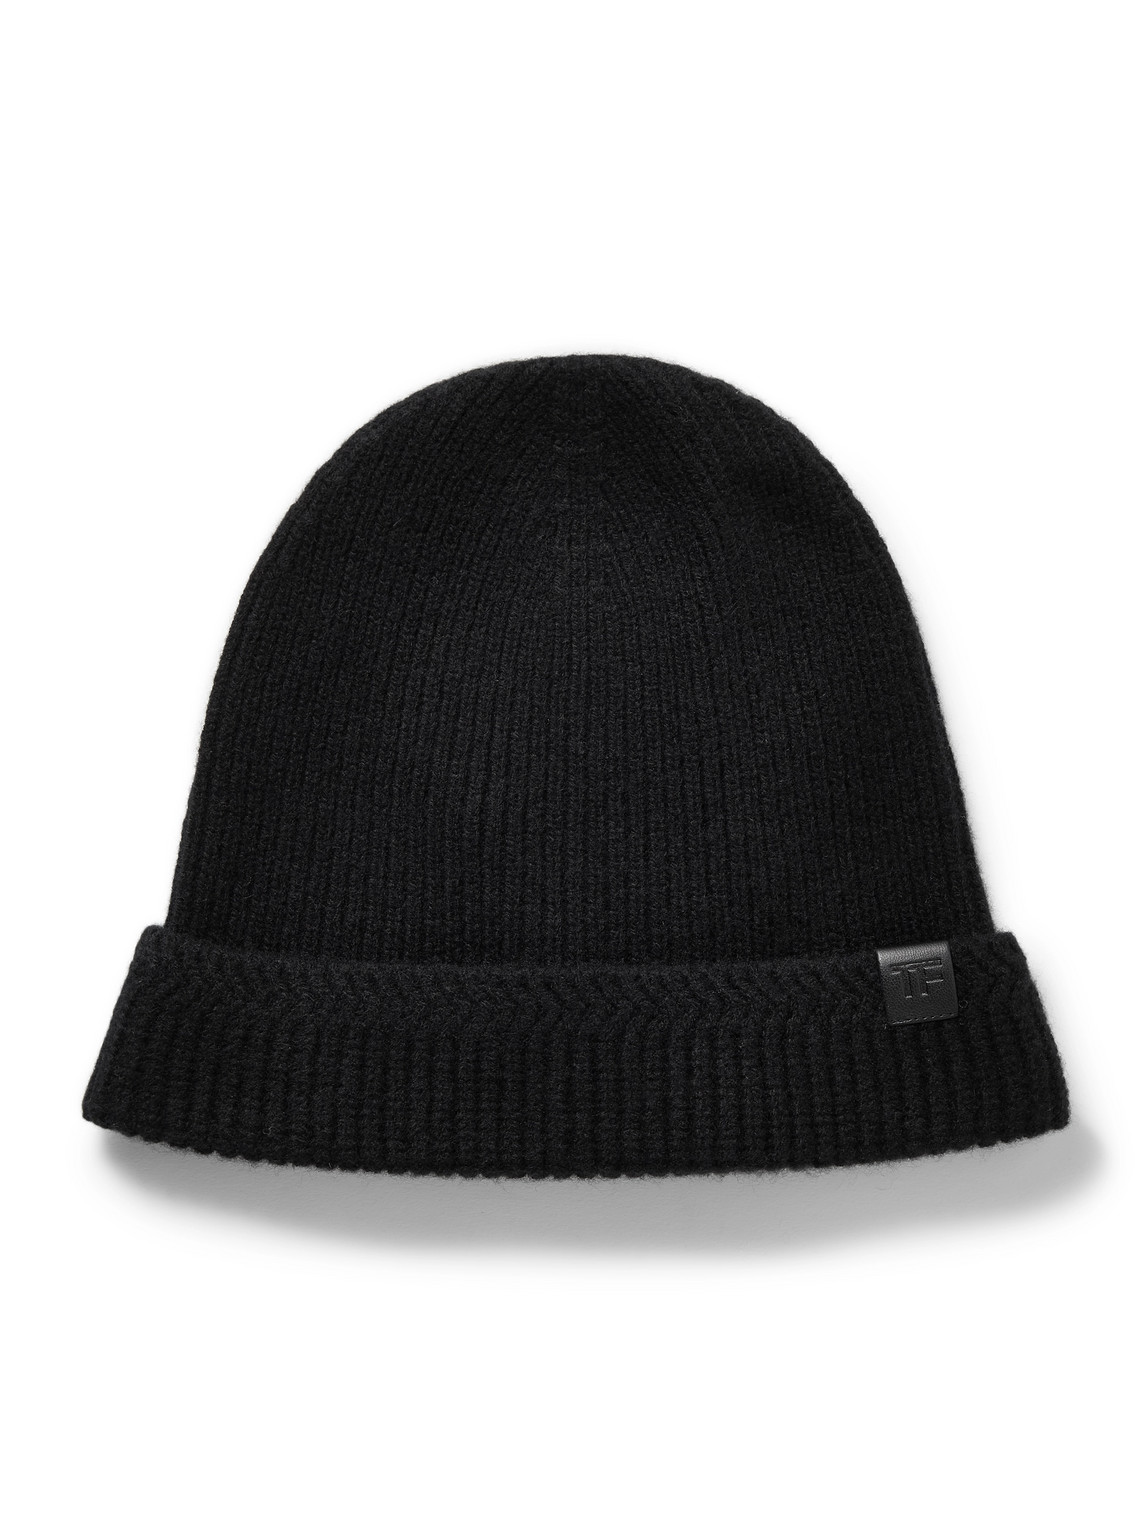 TOM FORD LEATHER-TRIMMED RIBBED WOOL AND CASHMERE-BLEND BEANIE